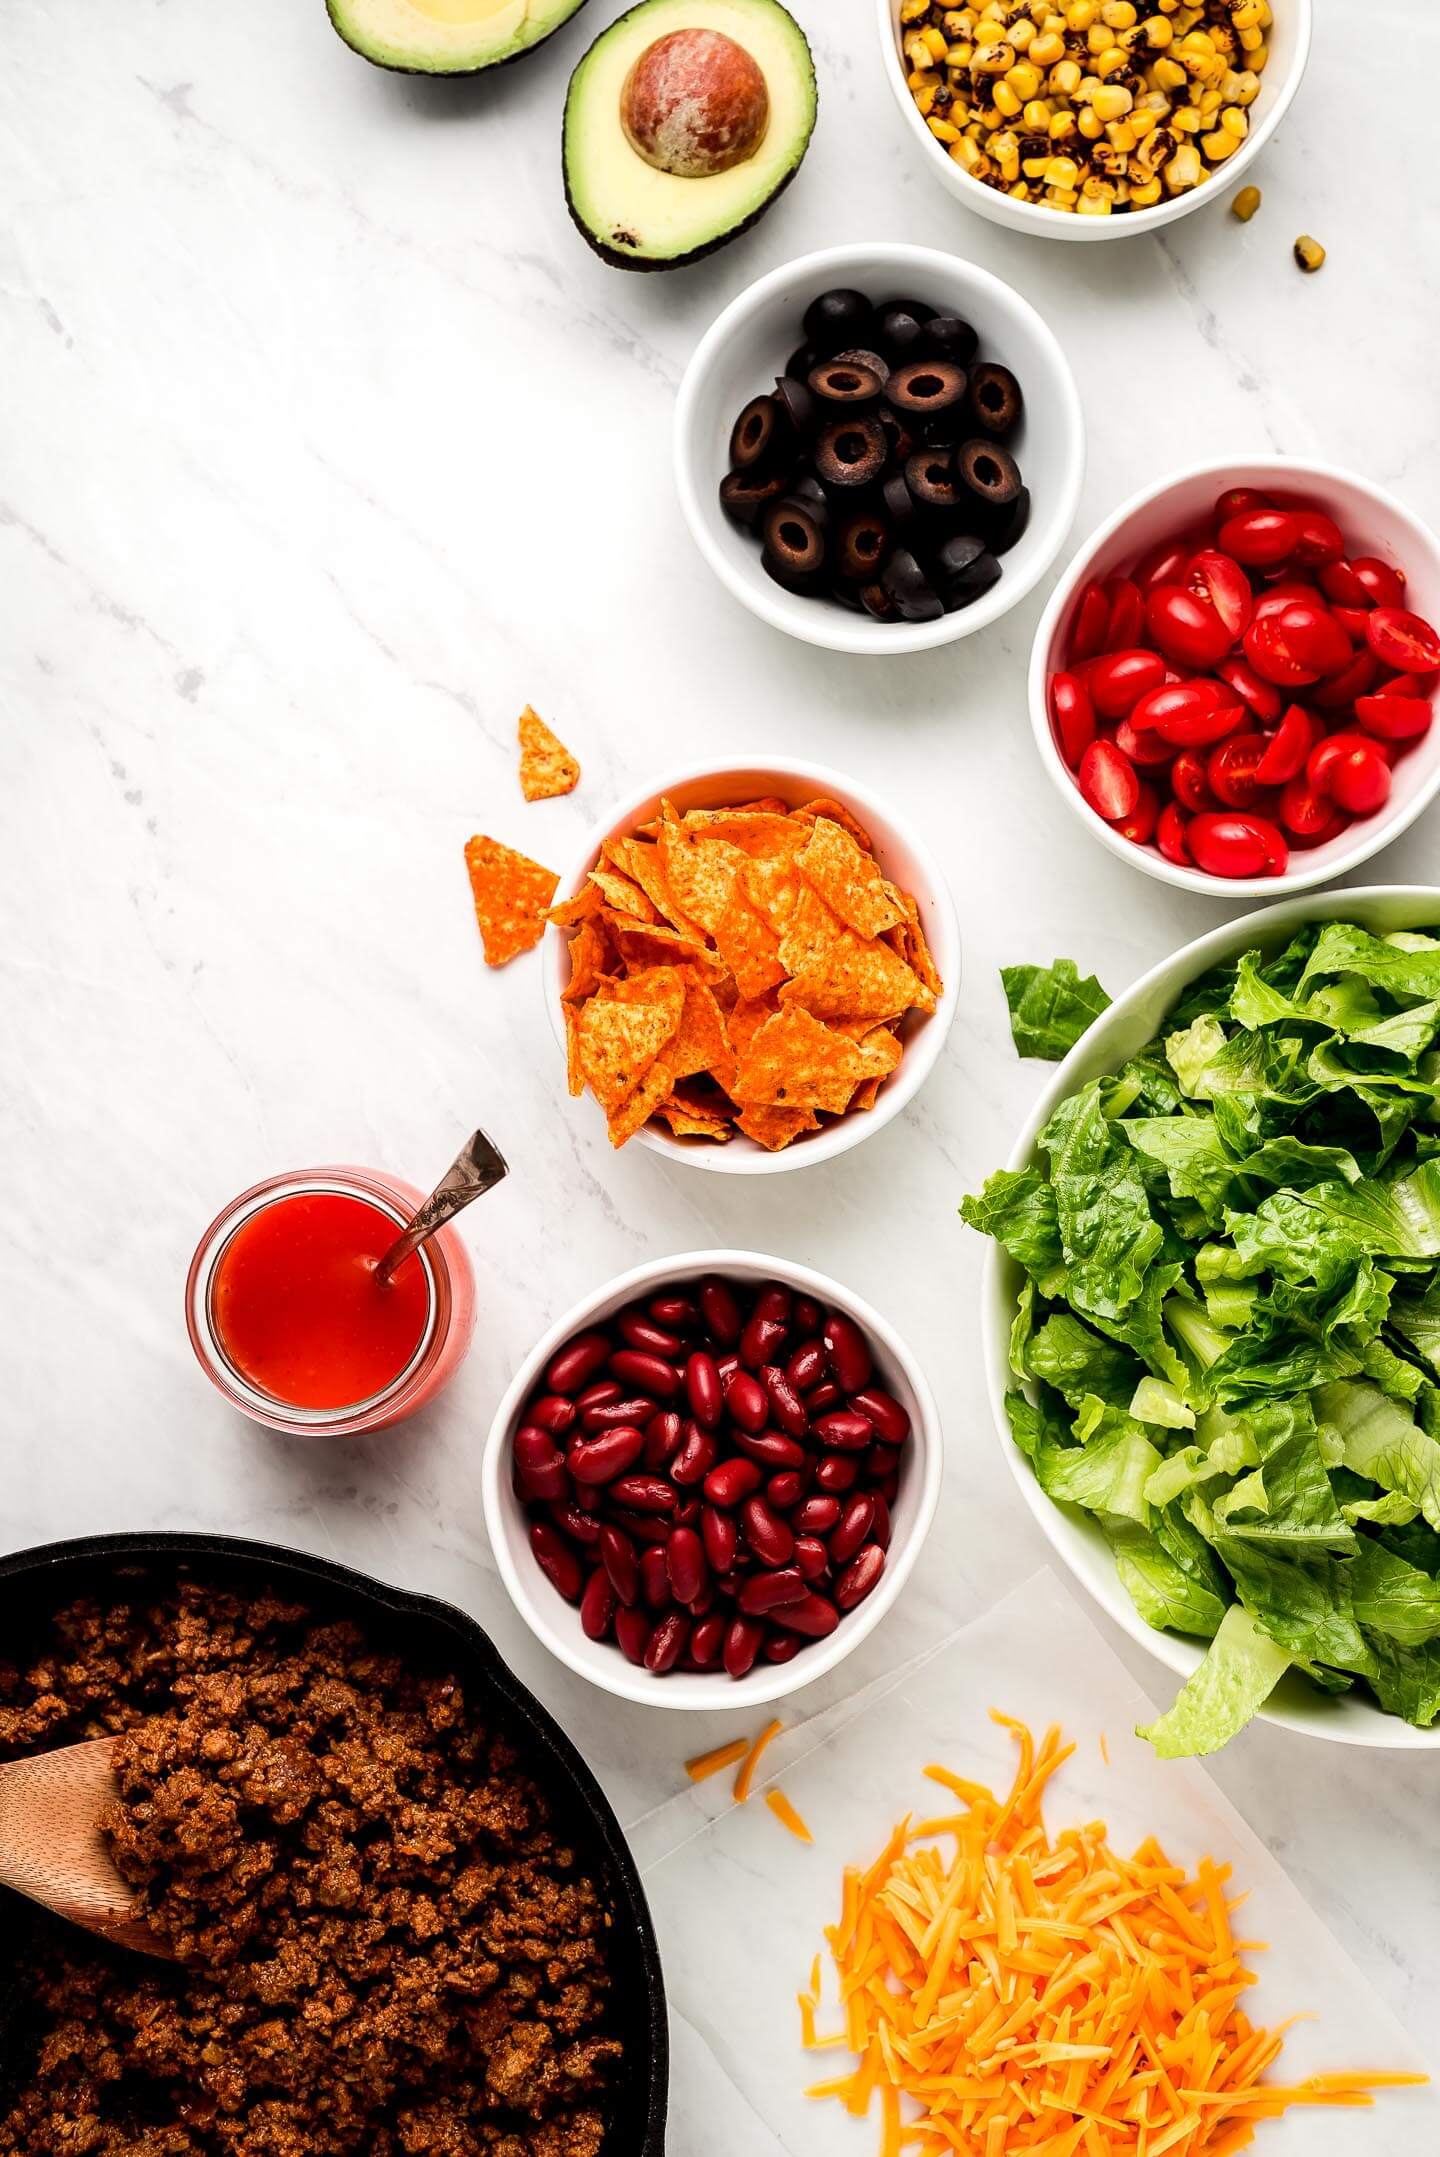 Ingredients on a marble surface- roasted corn, avocado, black olives, tomatoes, Doritos, lettuce, kidney beans, shredded cheese, taco meat, and dressing.